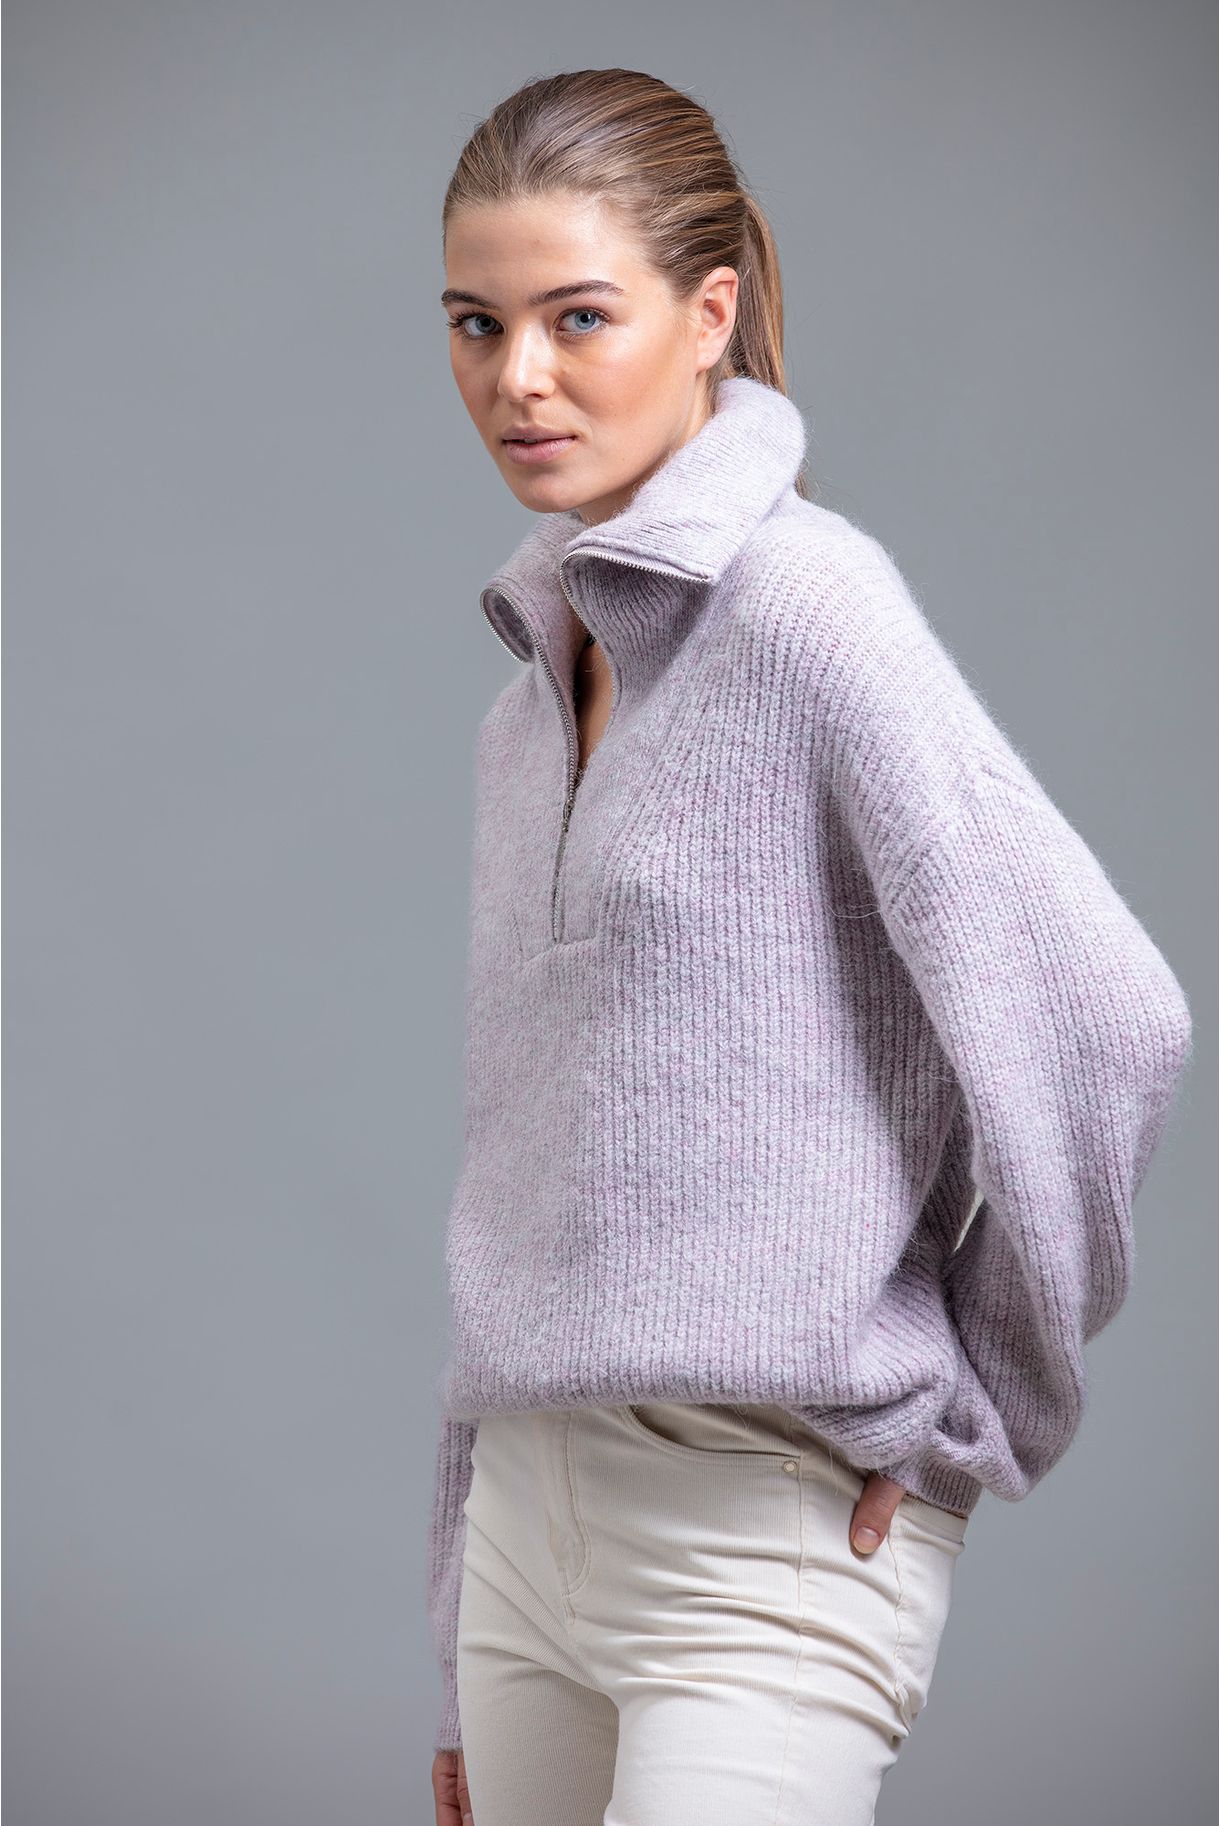 Knitted sweater with collar closure